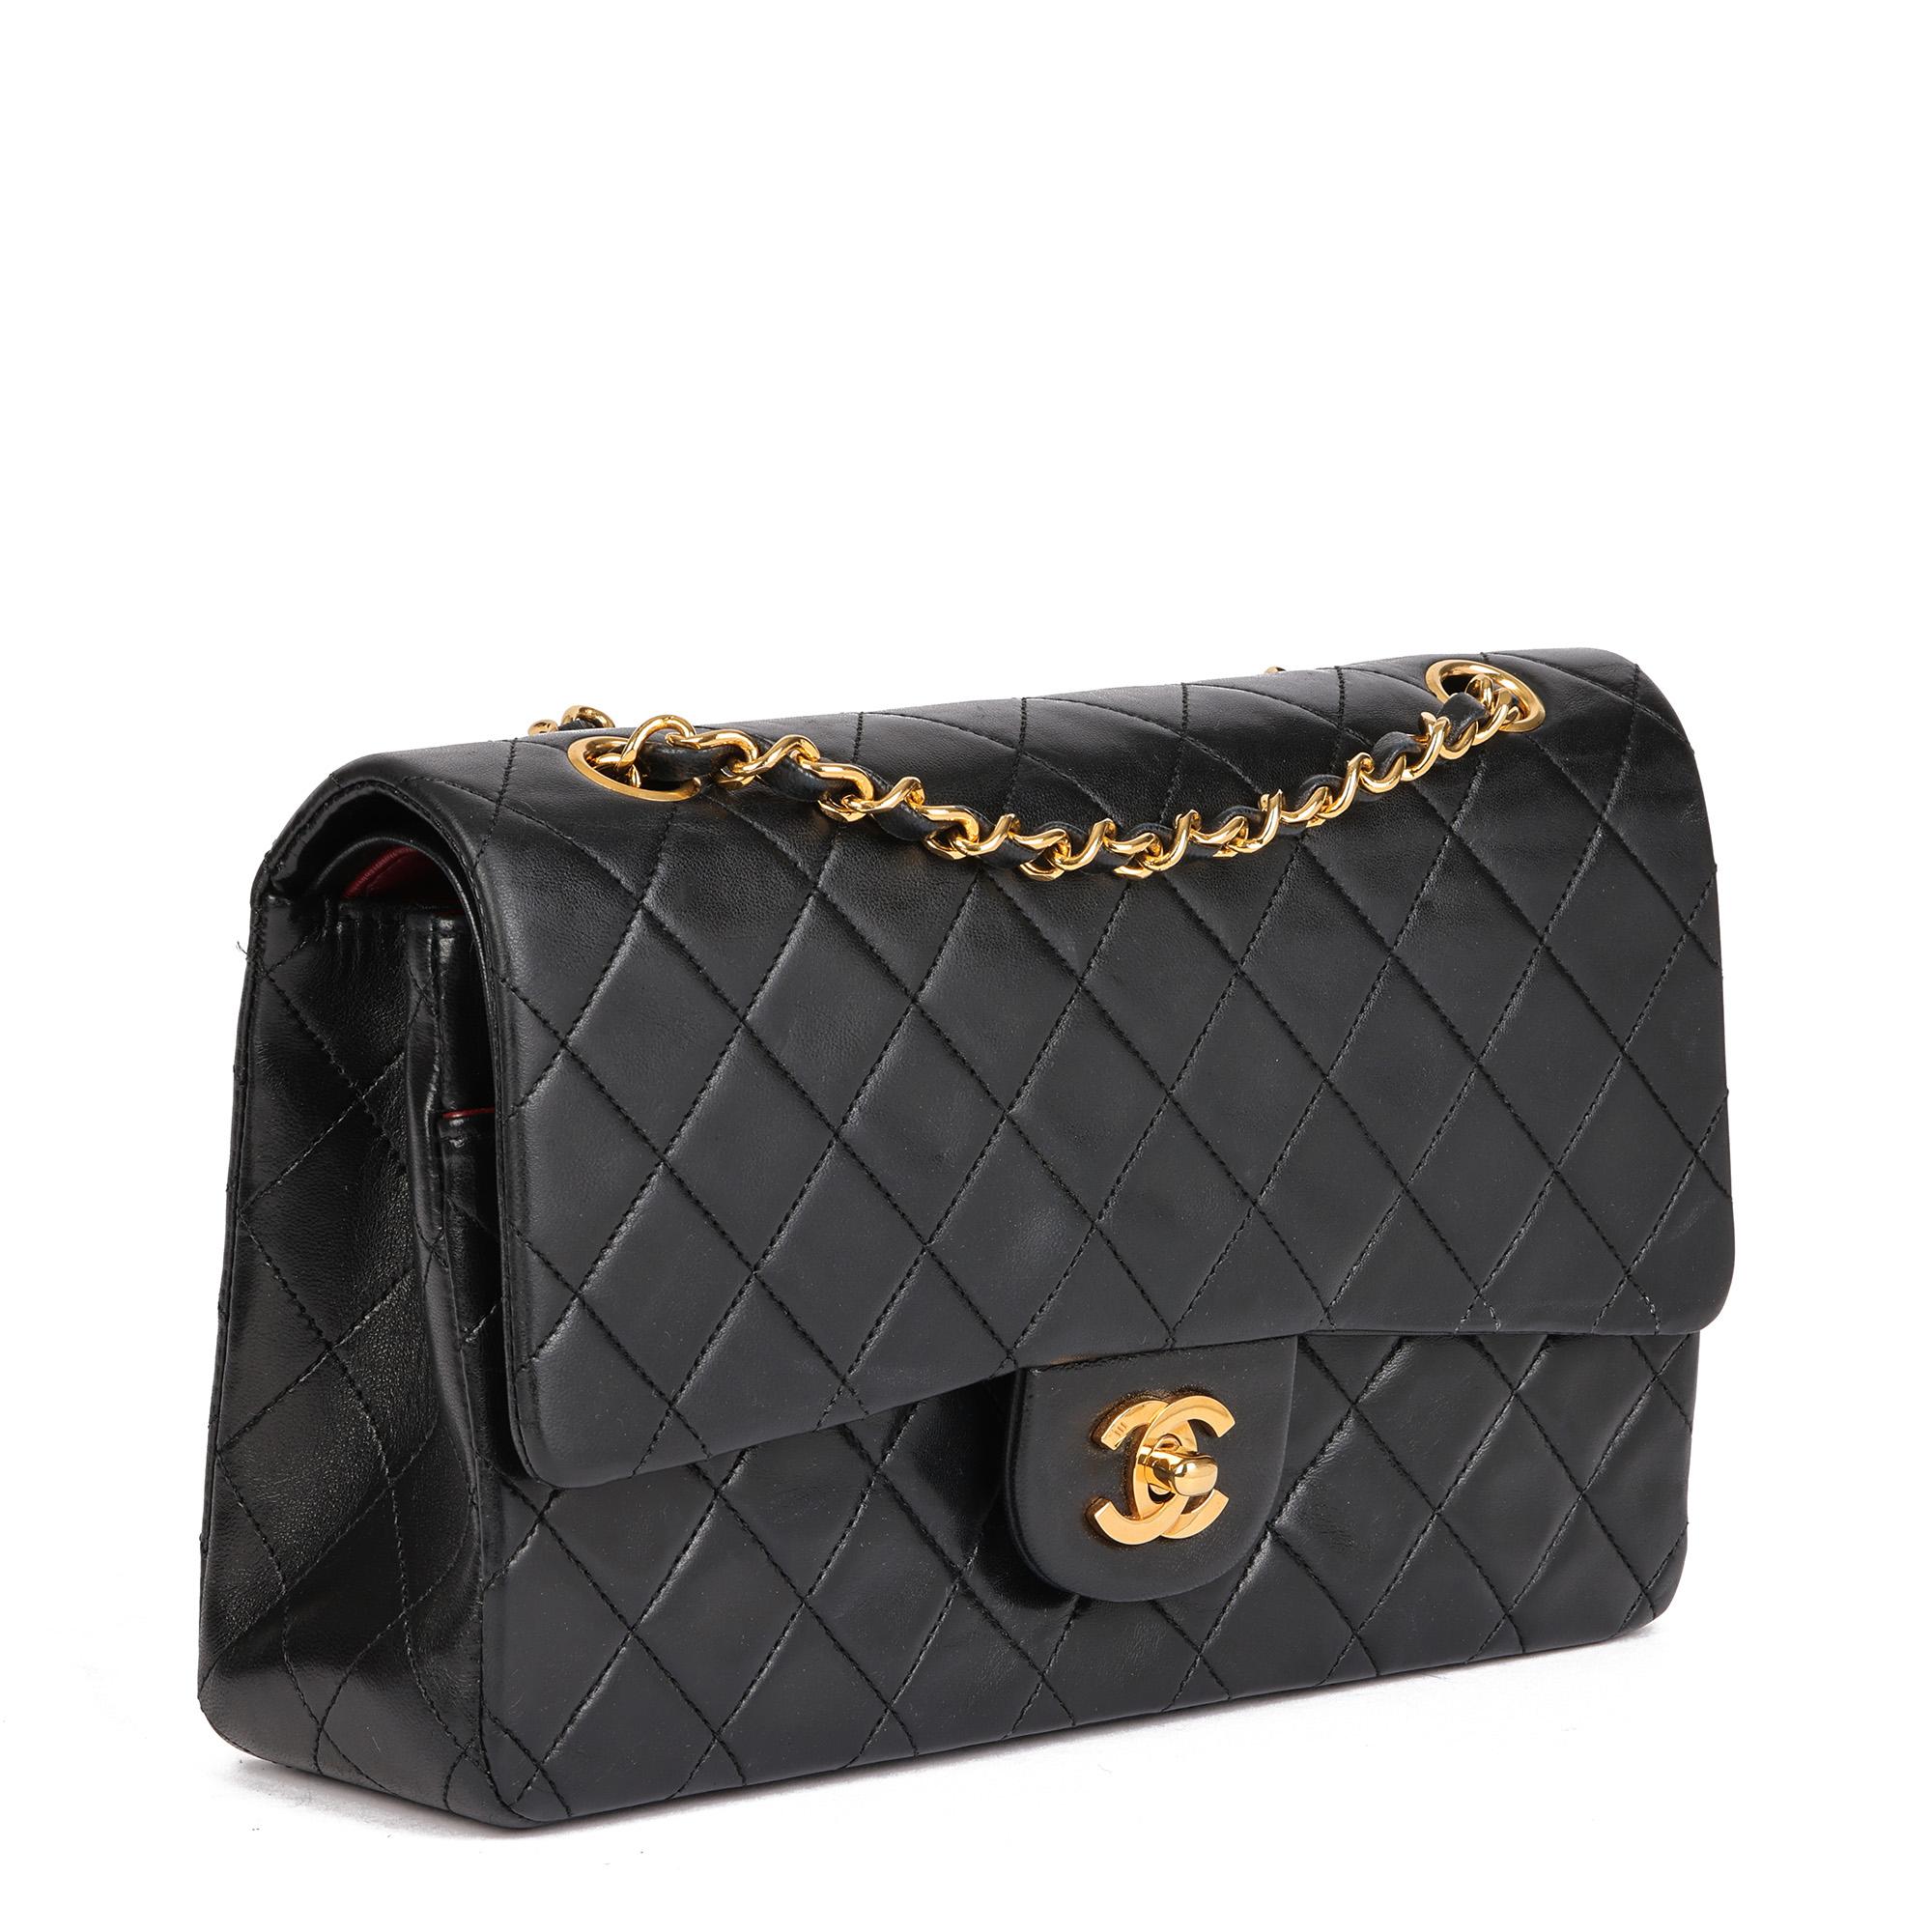 Chanel BLACK QUILTED LAMBSKIN VINTAGE MEDIUM CLASSIC DOUBLE FLAP BAG


CONDITION NOTES
The exterior is in excellent condition with light signs of use.
The interior is in excellent condition with light signs of use.
The hardware is in excellent